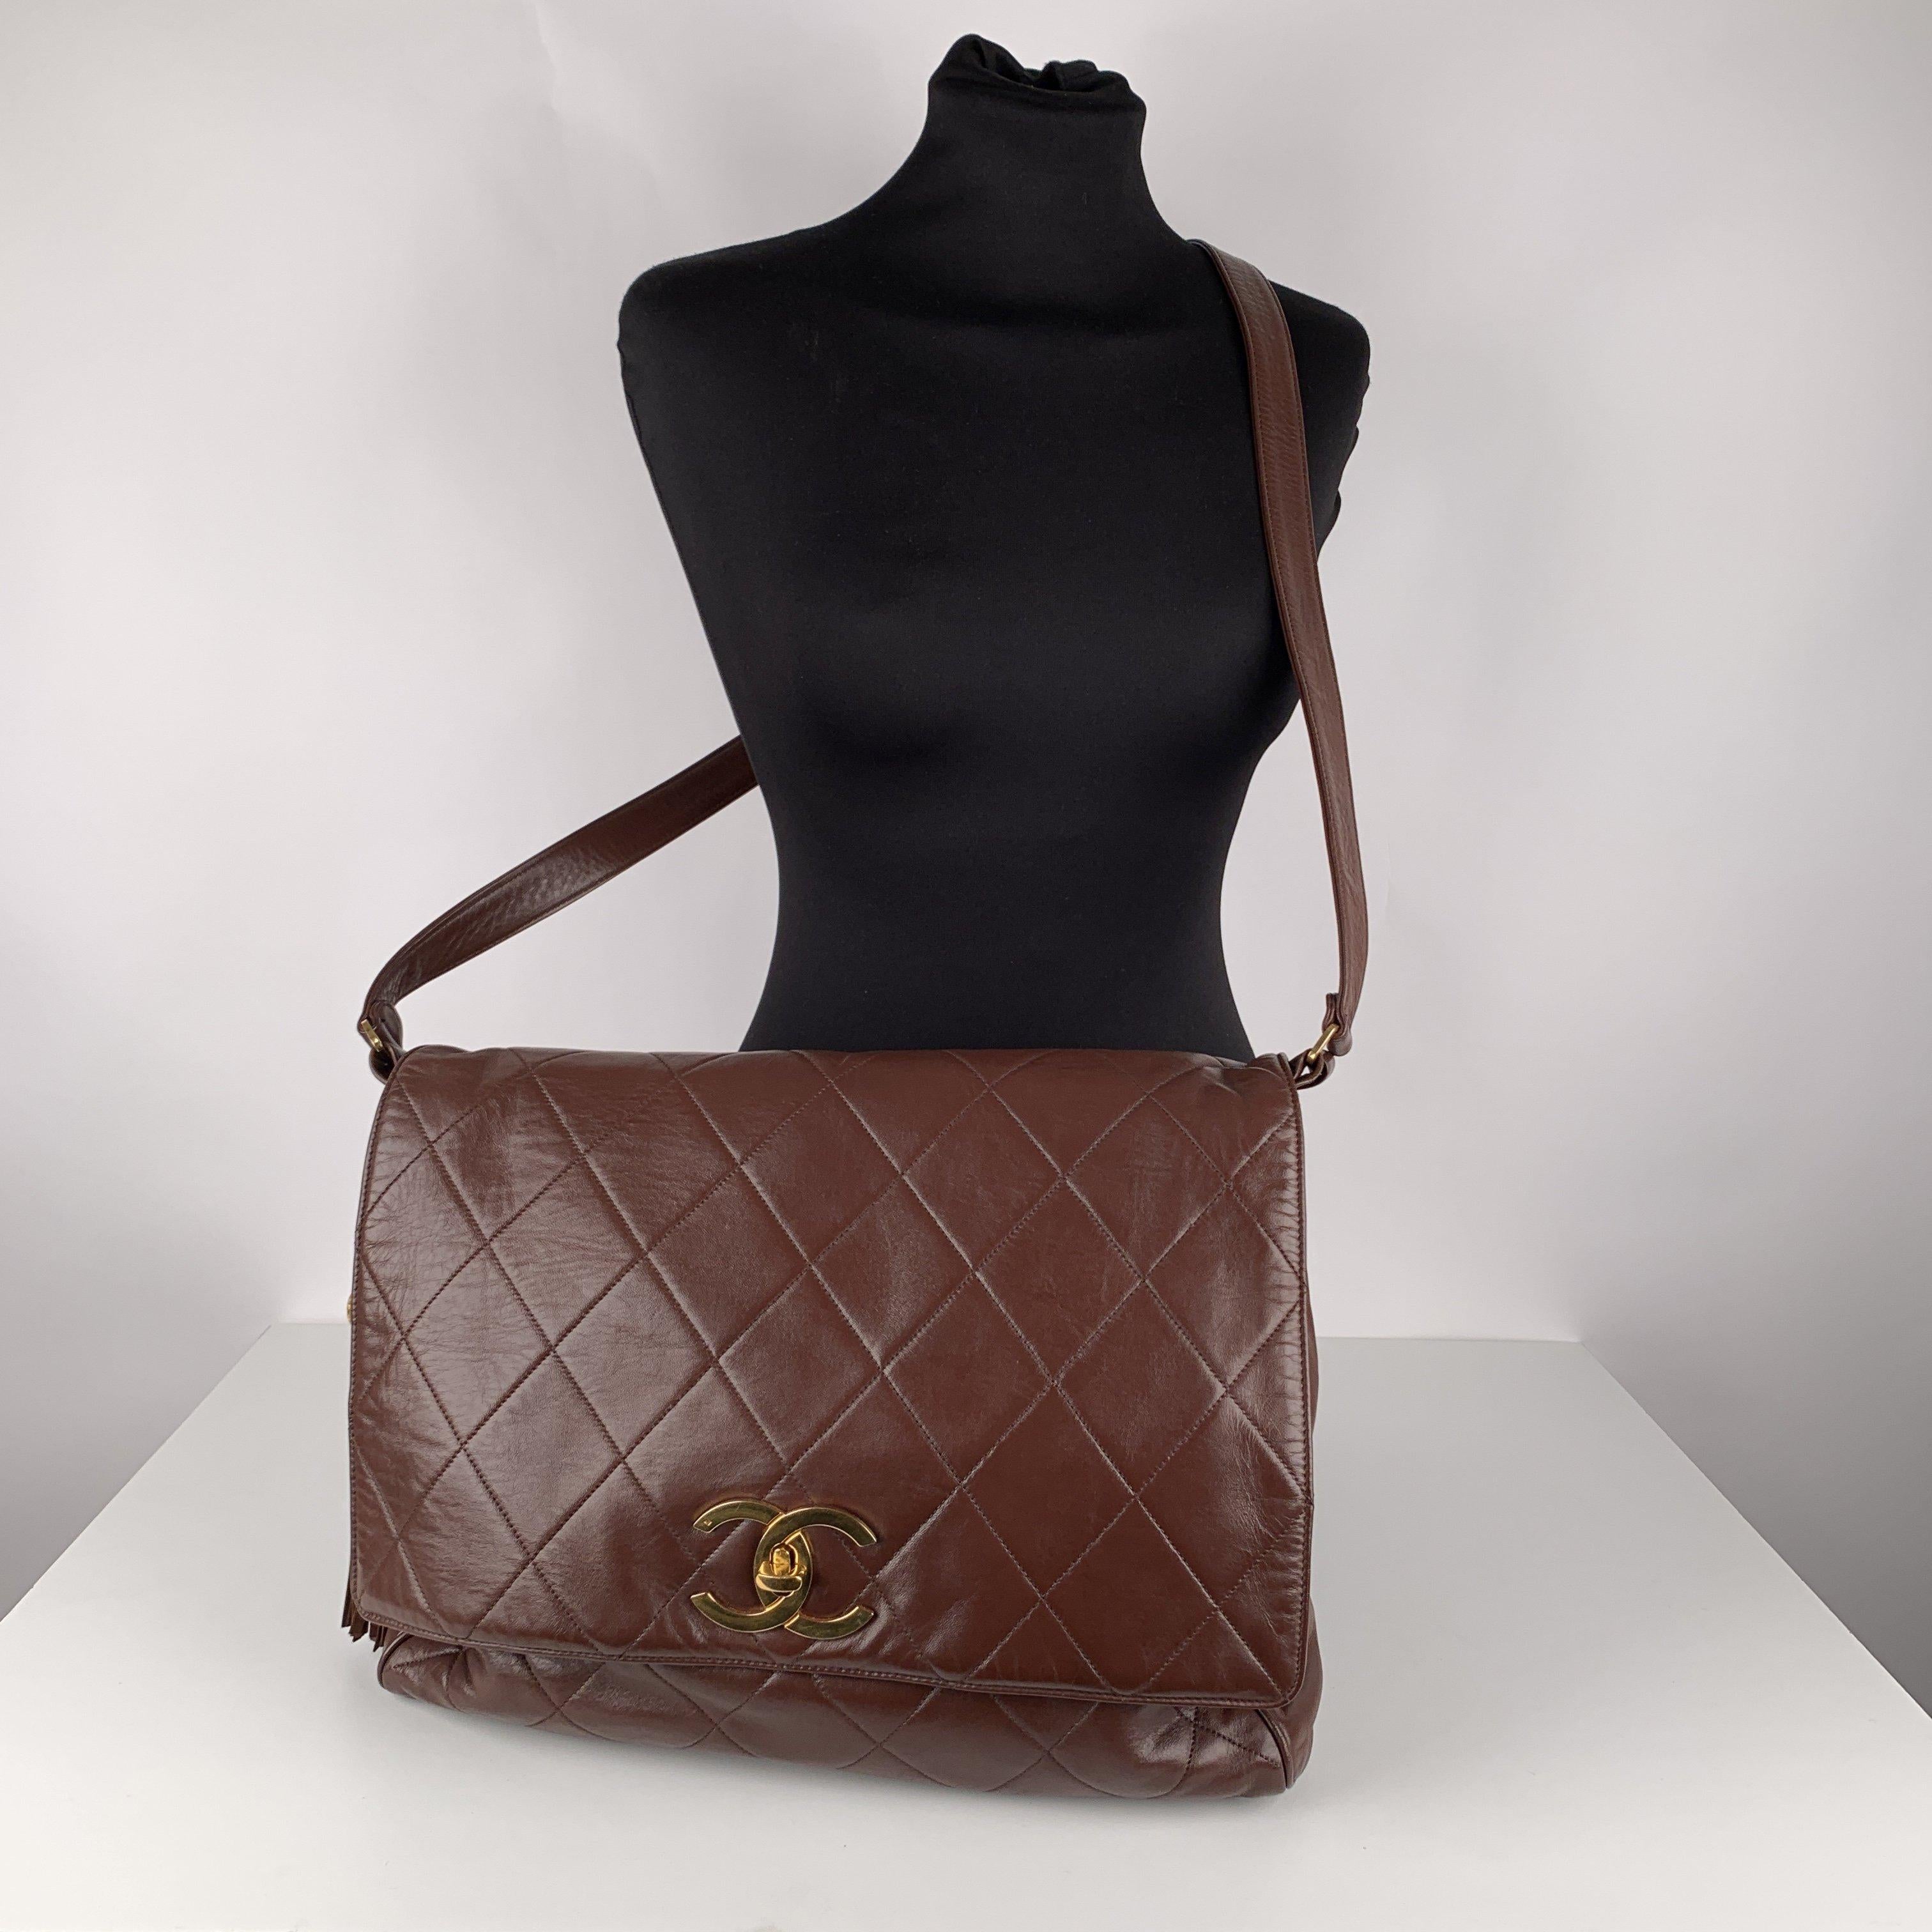 MATERIAL: Leather COLOR: Brown MODEL: Messenger Bag GENDER: Women SIZE: Large Condition CONDITION DETAILS: A :EXCELLENT CONDITION - Used once or twice. Looks mint. Imperceptible signs of wear may be present due to storage - Some light scratches and